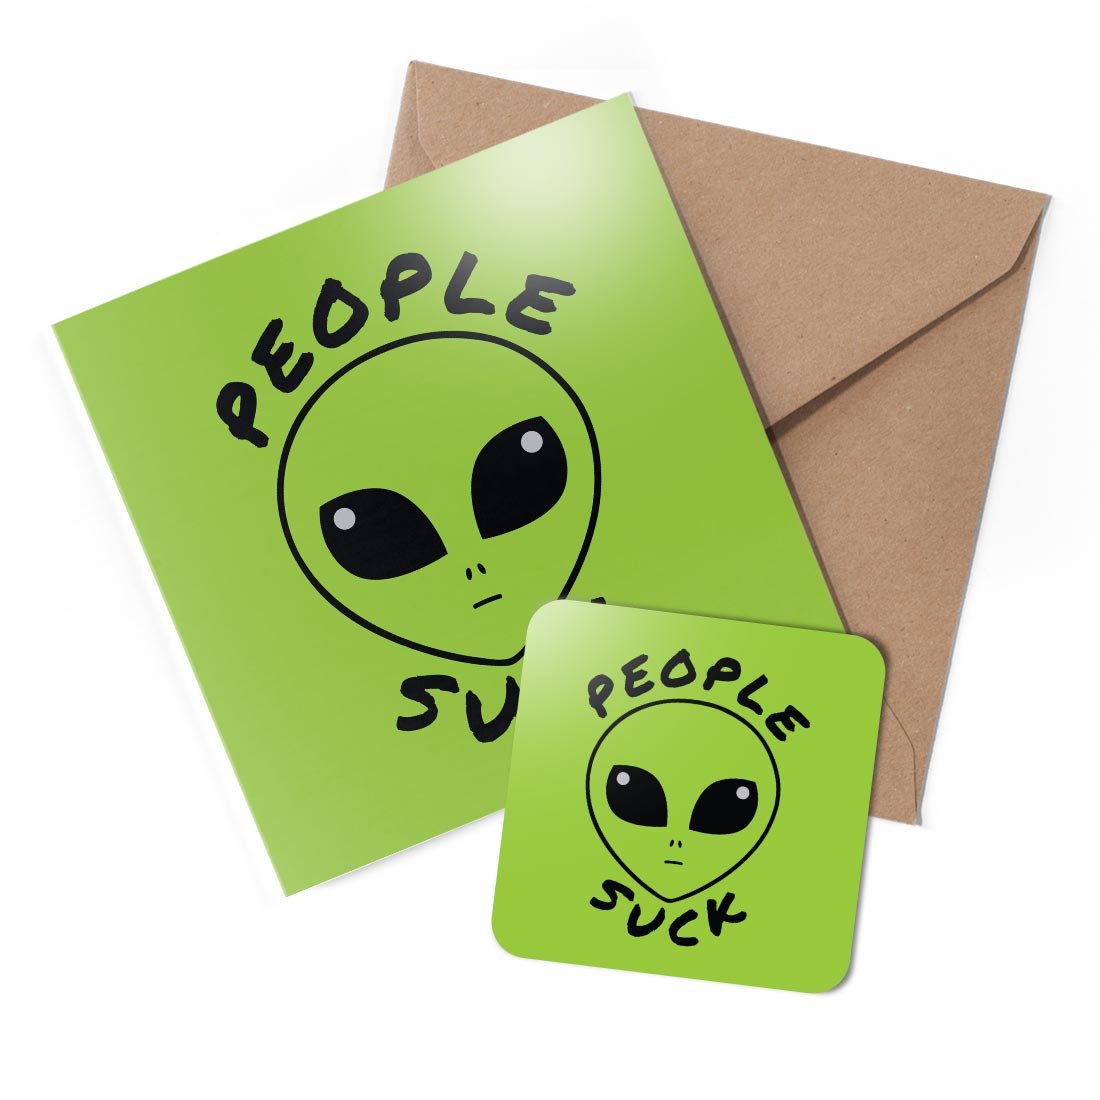 1 x Greeting Card & Coaster Set - Funny Alien People Suck Space UFO #58686